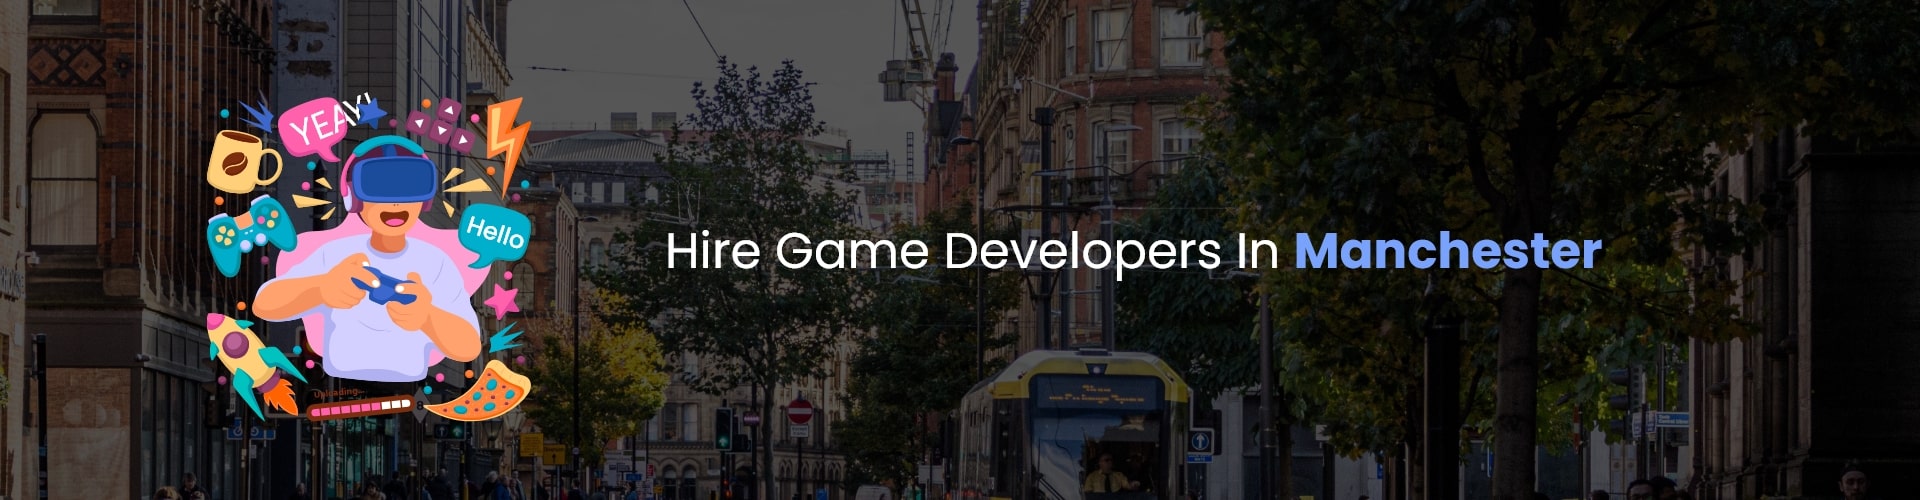 hire game developers in manchester